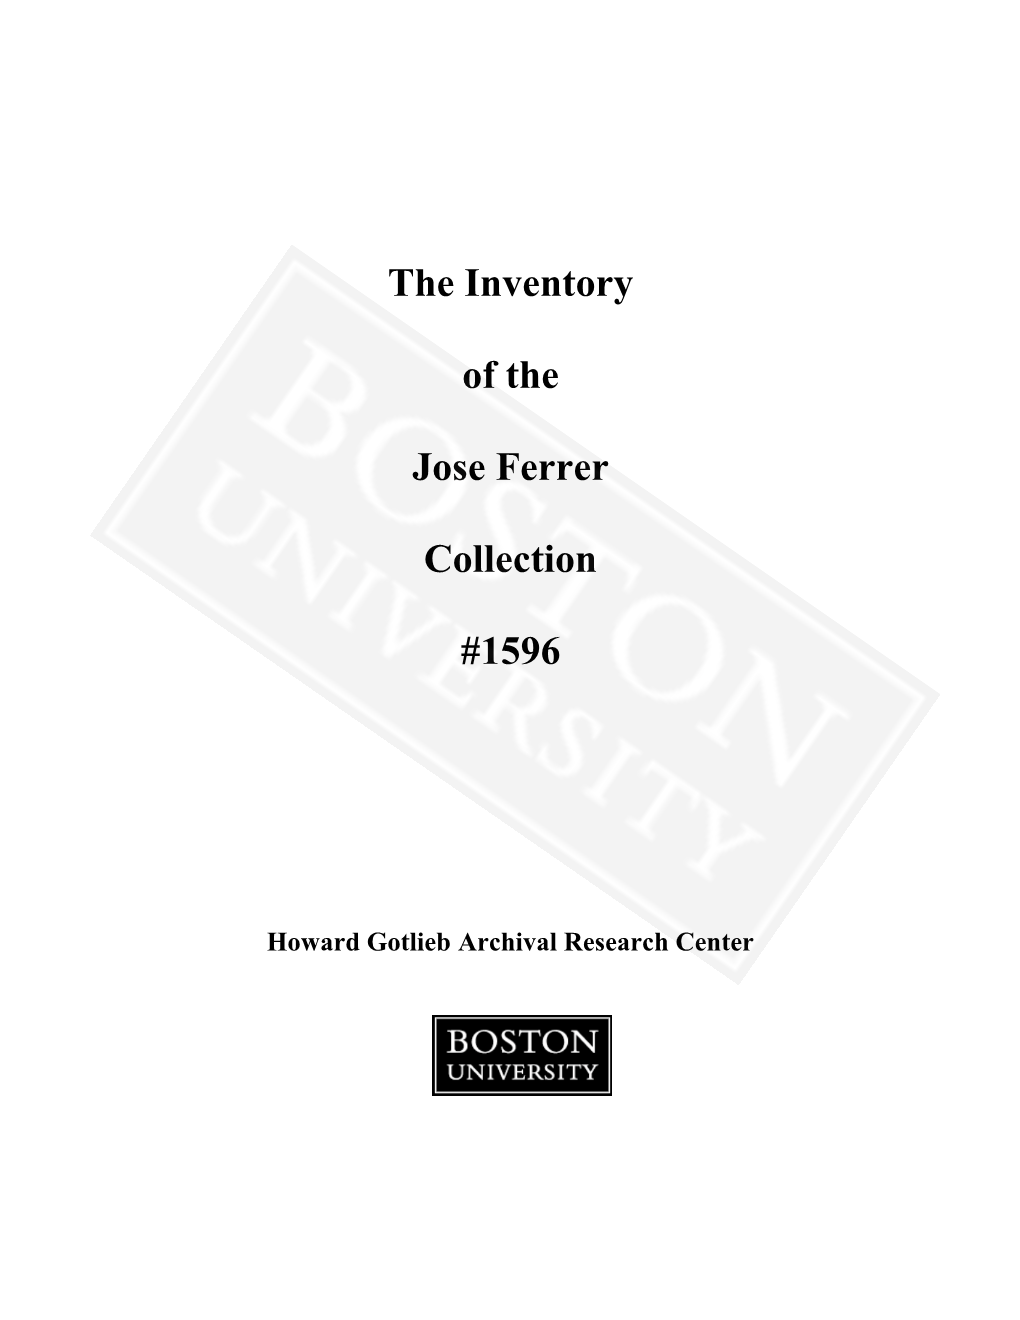 The Inventory of the Jose Ferrer Collection #1596